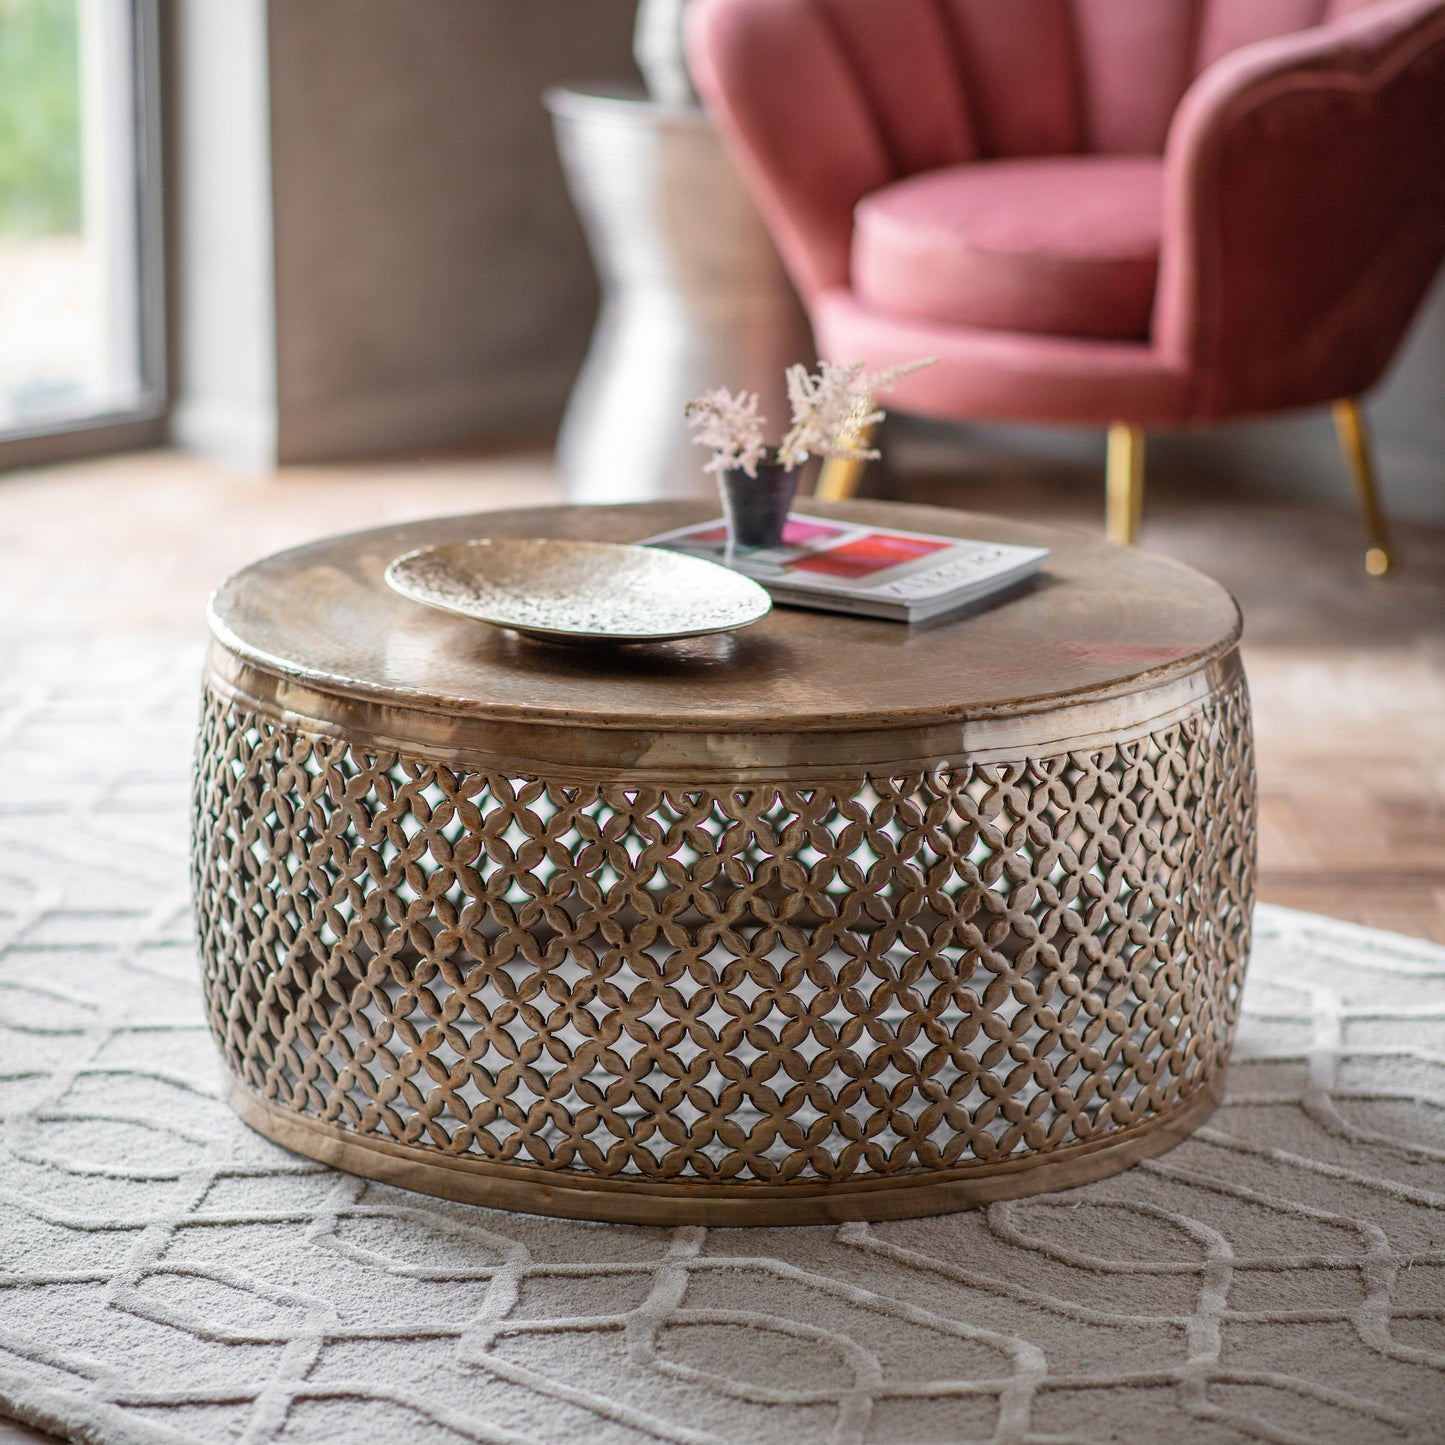 Khalasar Middle Eastern Style Coffee Table